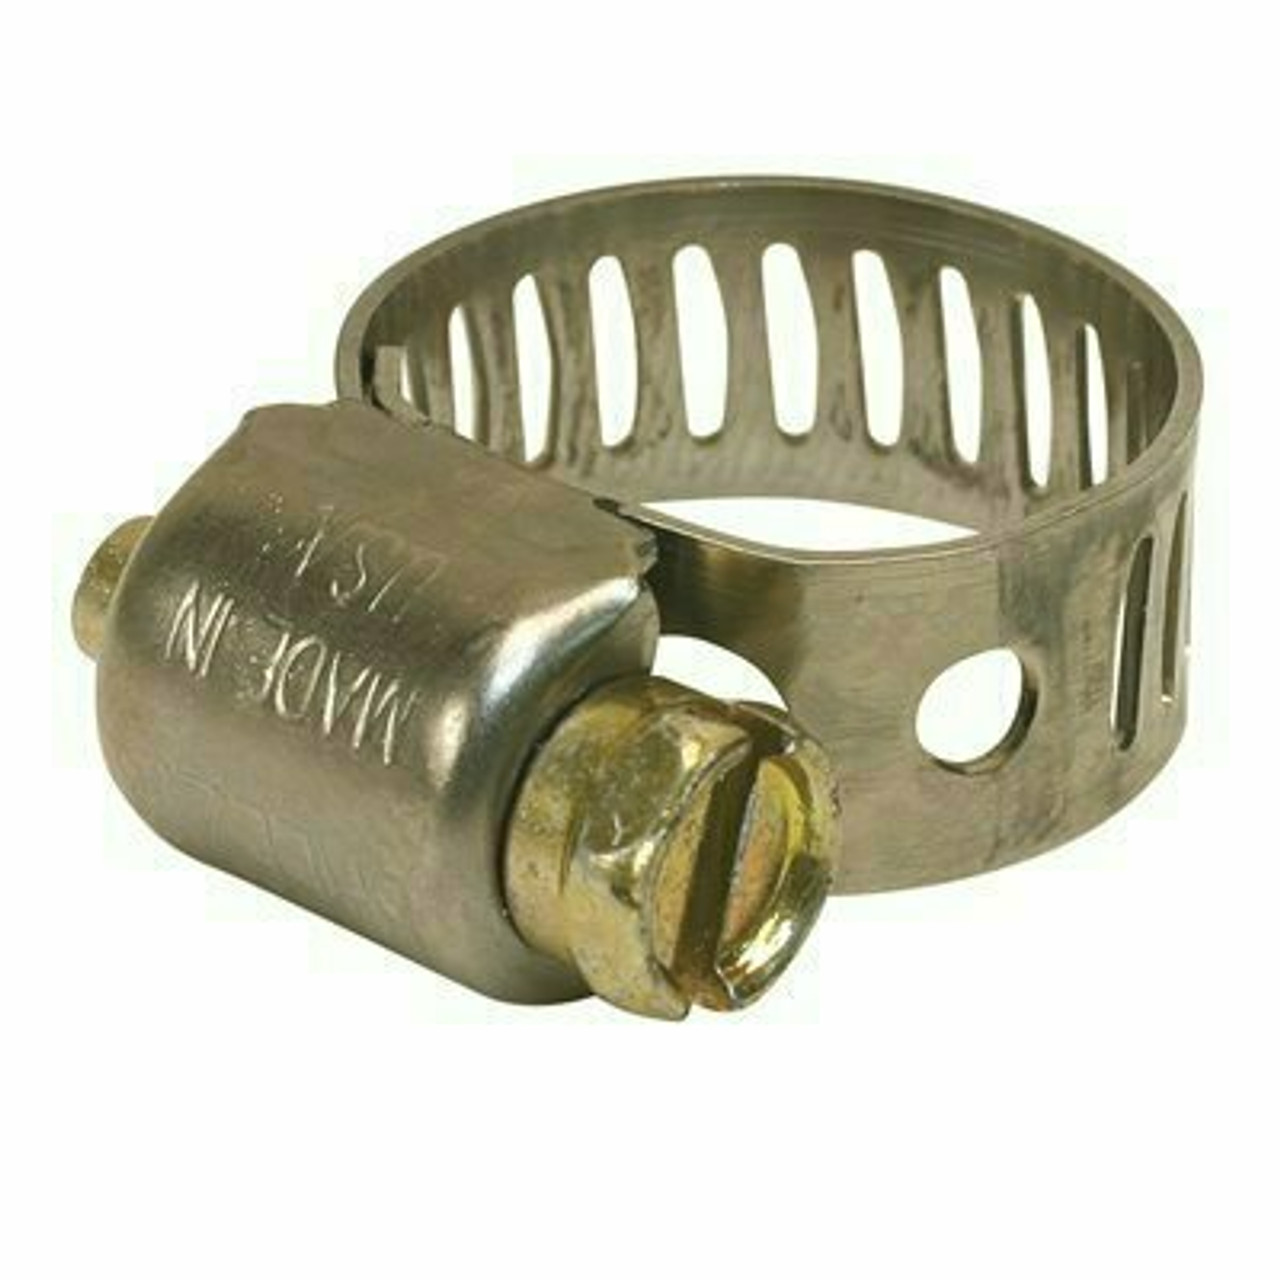 Breeze Clamp Breeze Hose Clamp, 410 Stainless Steel, 9/16 In. To 1-1/16 In.